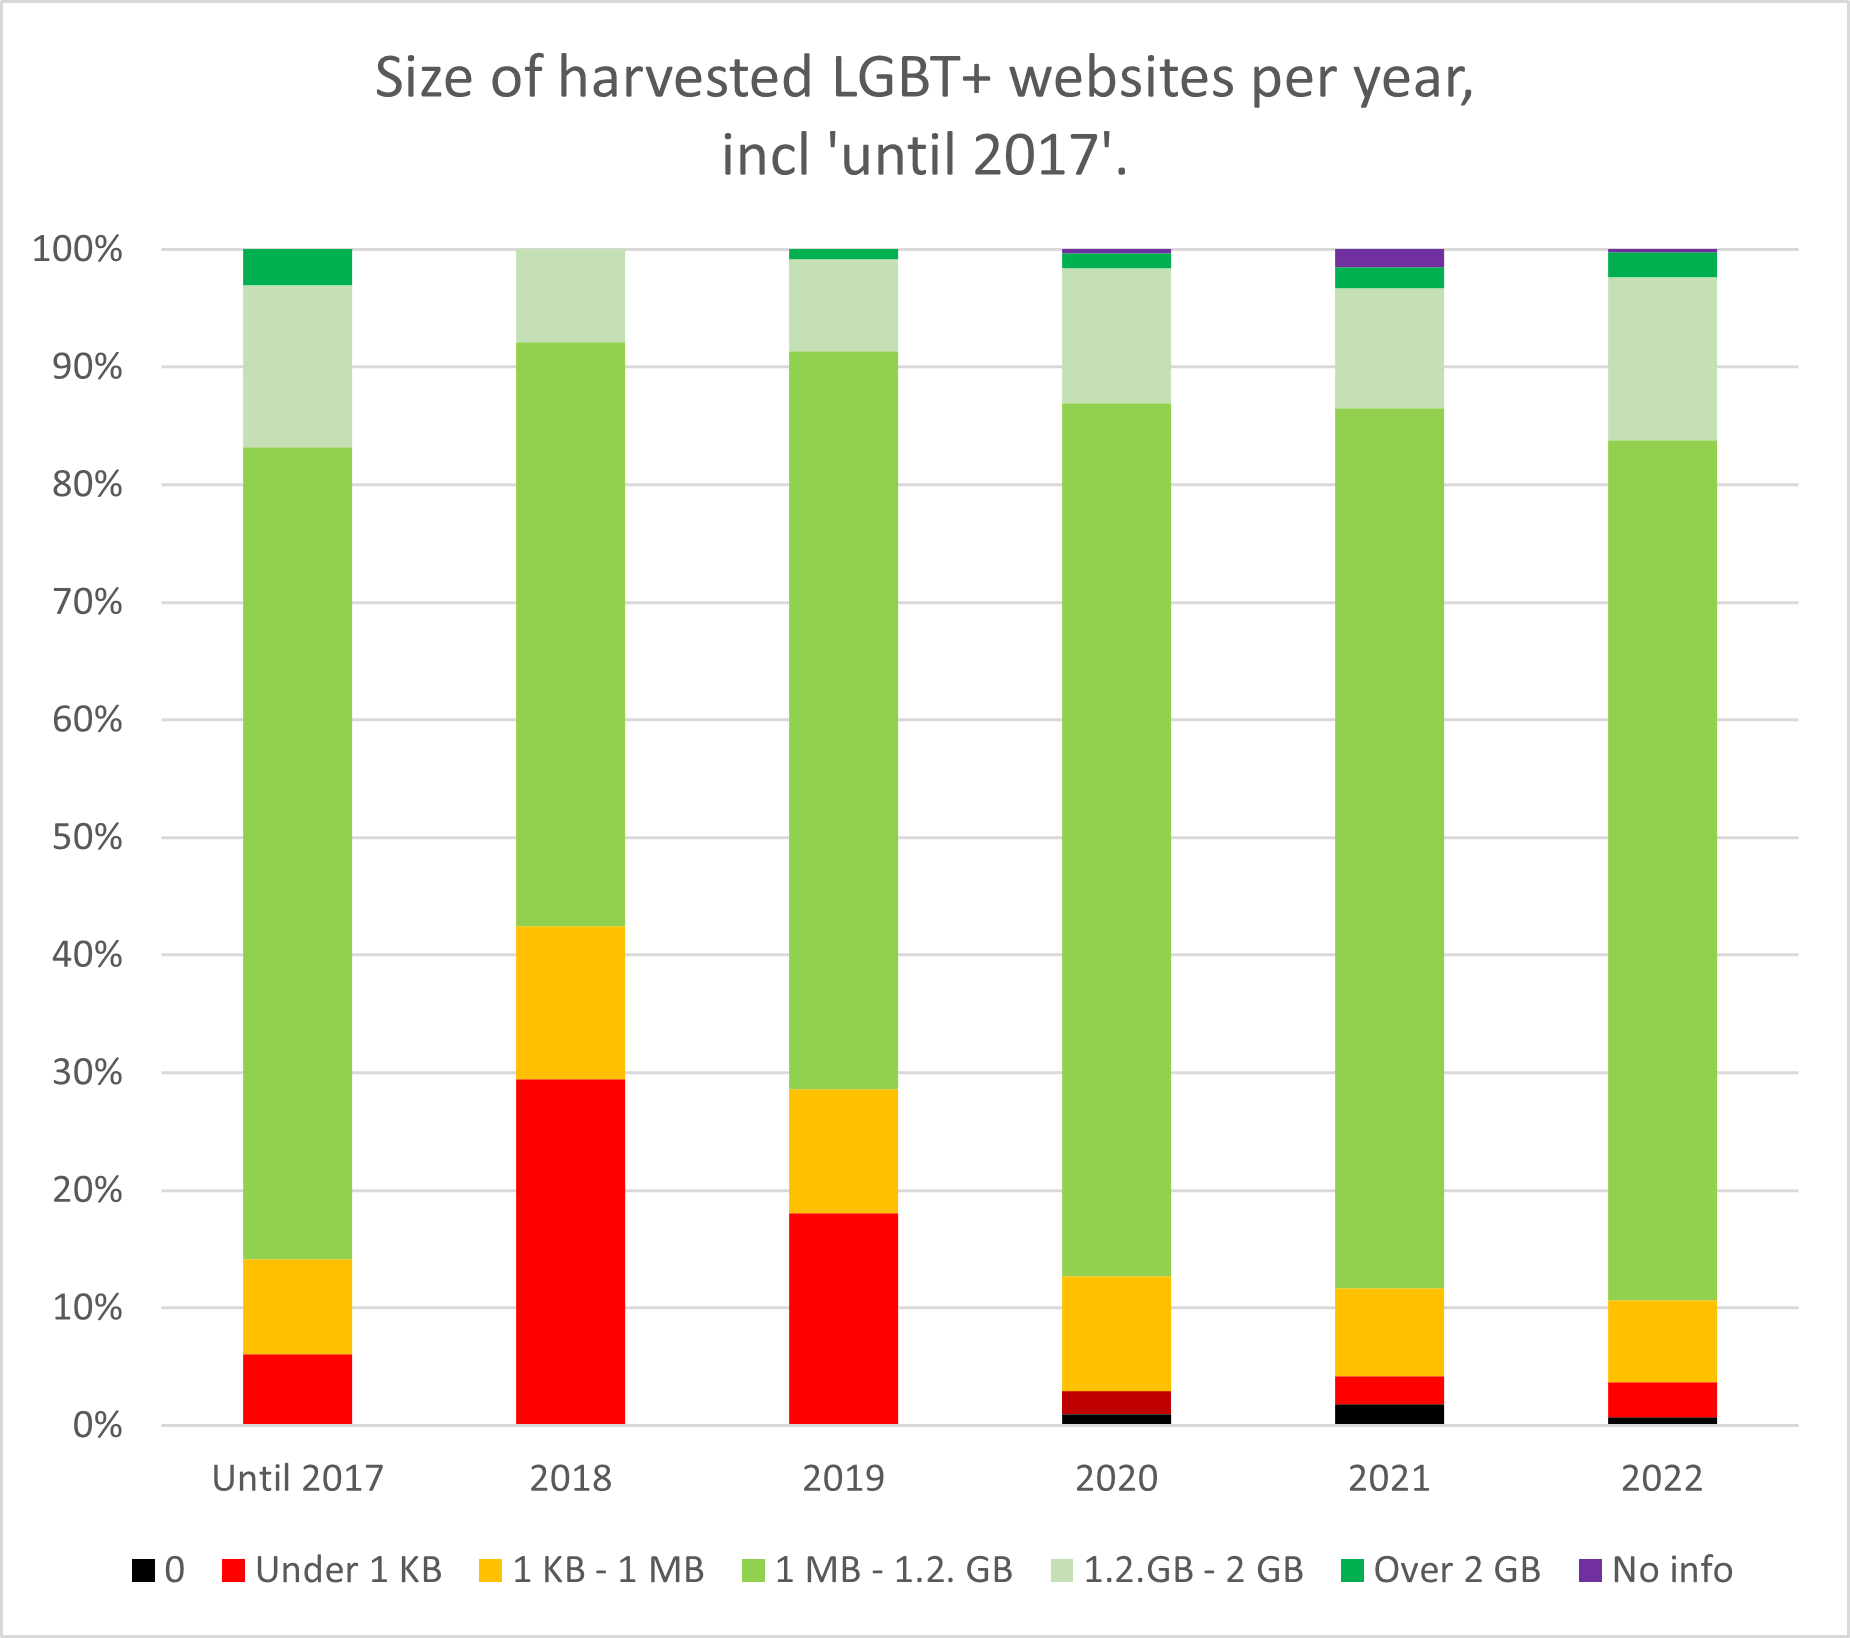 bar chart showing size of harvested LGBT+ websites per year in percentages